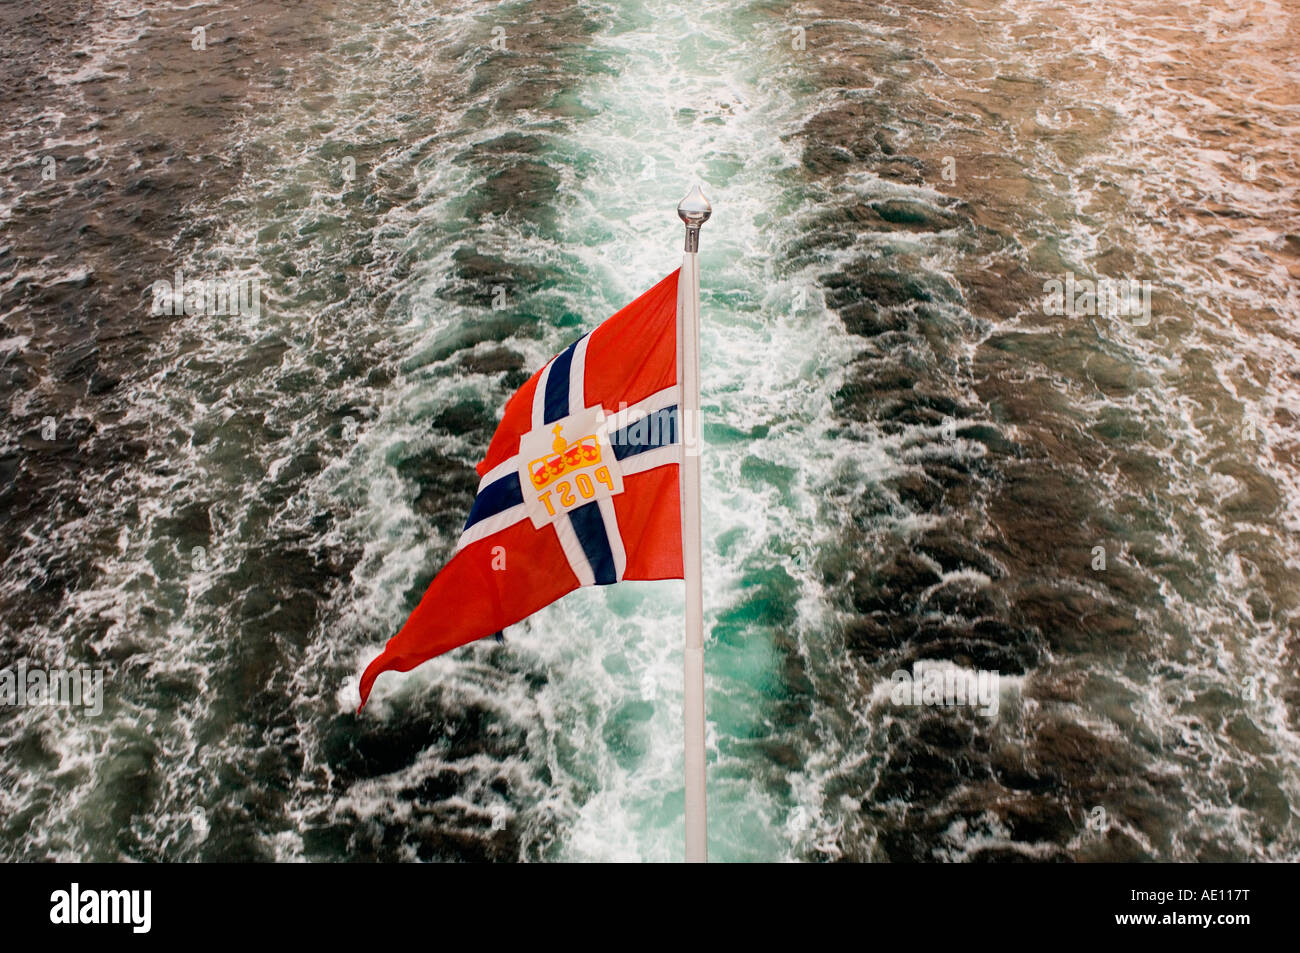 Norwegian national flag on a boat Stock Photo